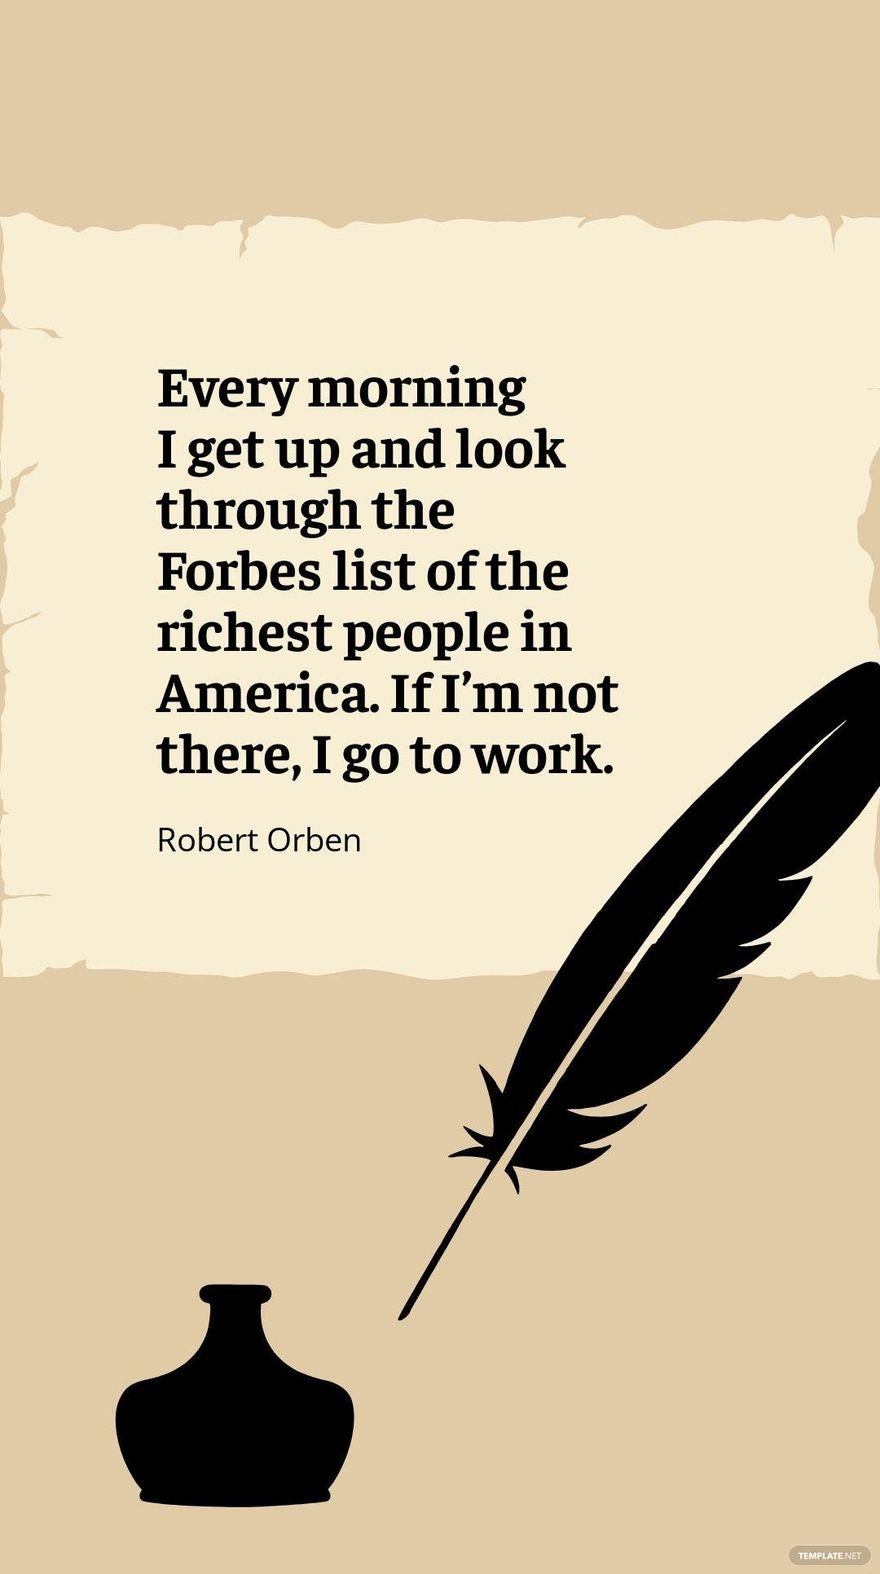 Robert Orben - Every morning I get up and look through the Forbes list of the richest people in America. If I’m not there, I go to work.